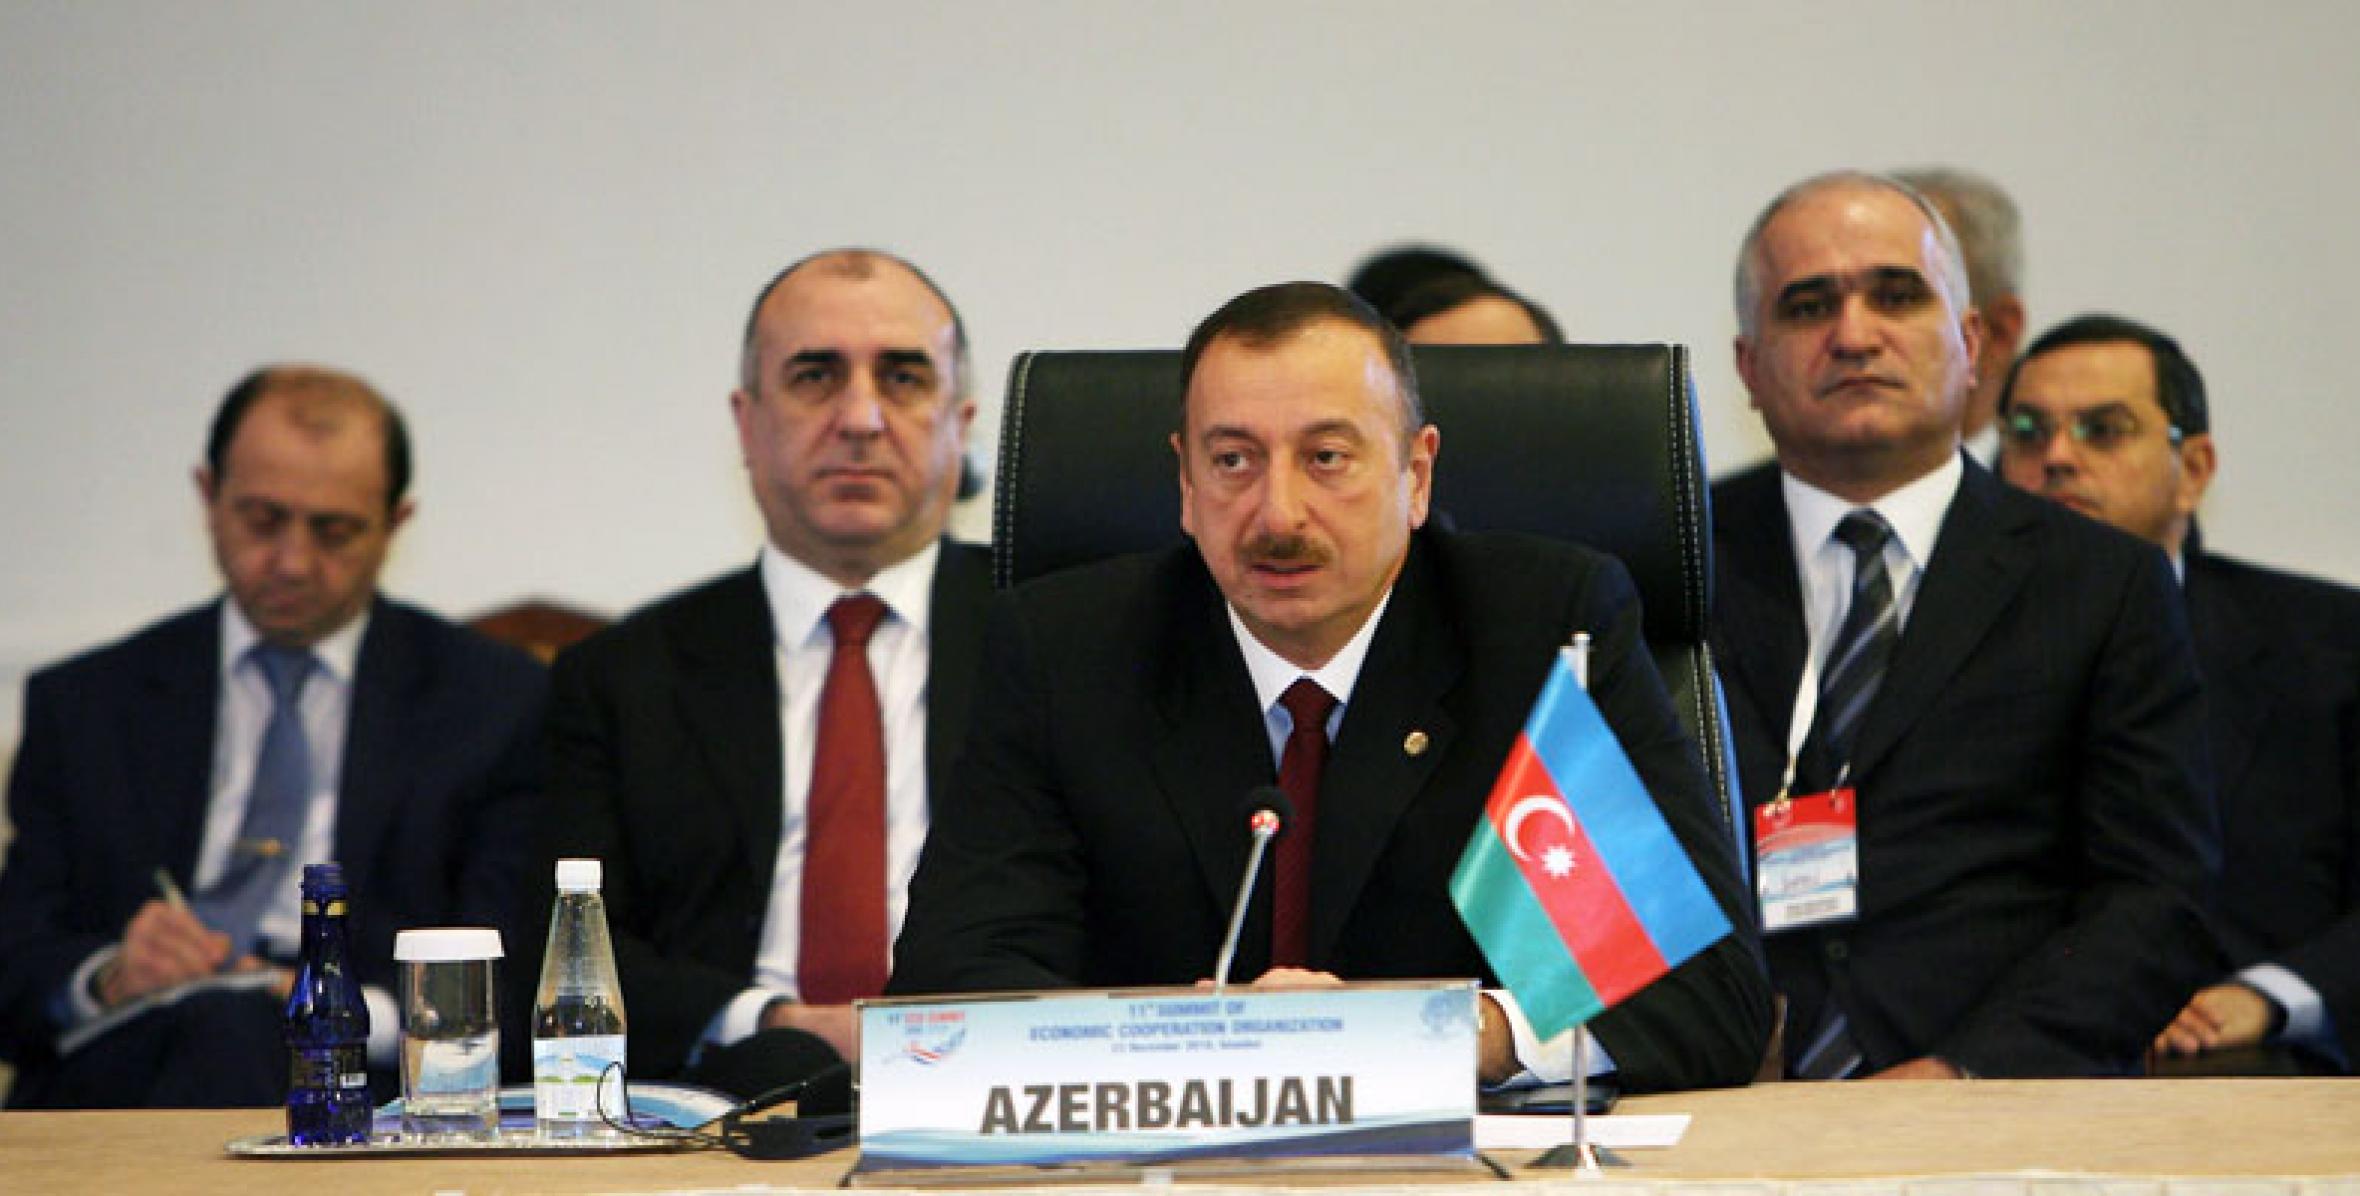 Ilham Aliyev attended the XI Summit of the Economic Cooperation Organization in Istanbul